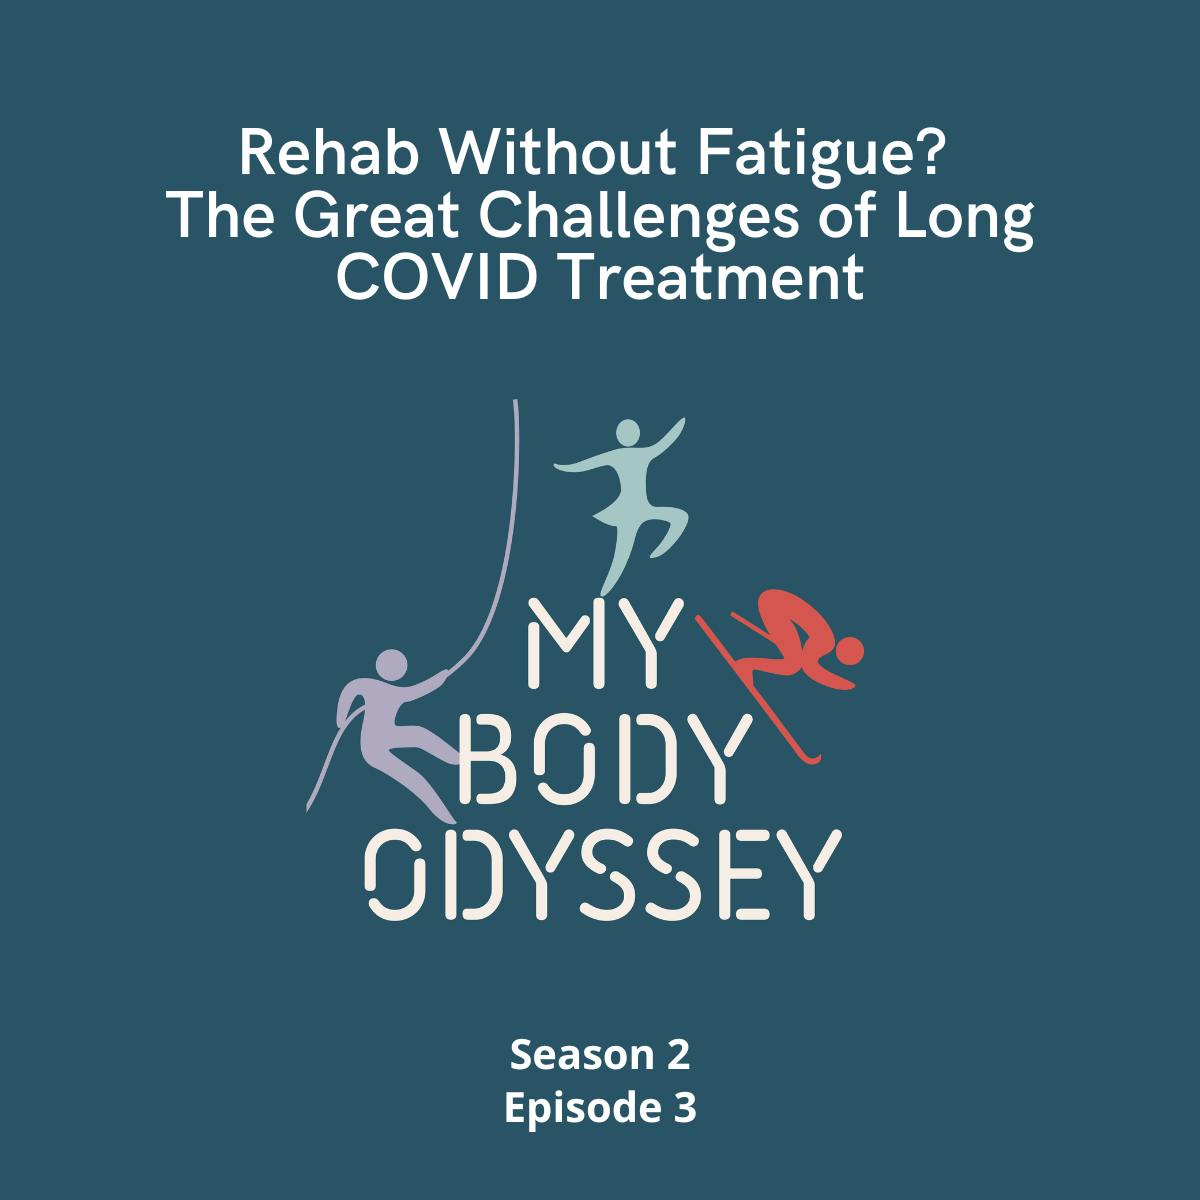 Rehab Without Fatigue? The Great Challenges of Long COVID Treatment